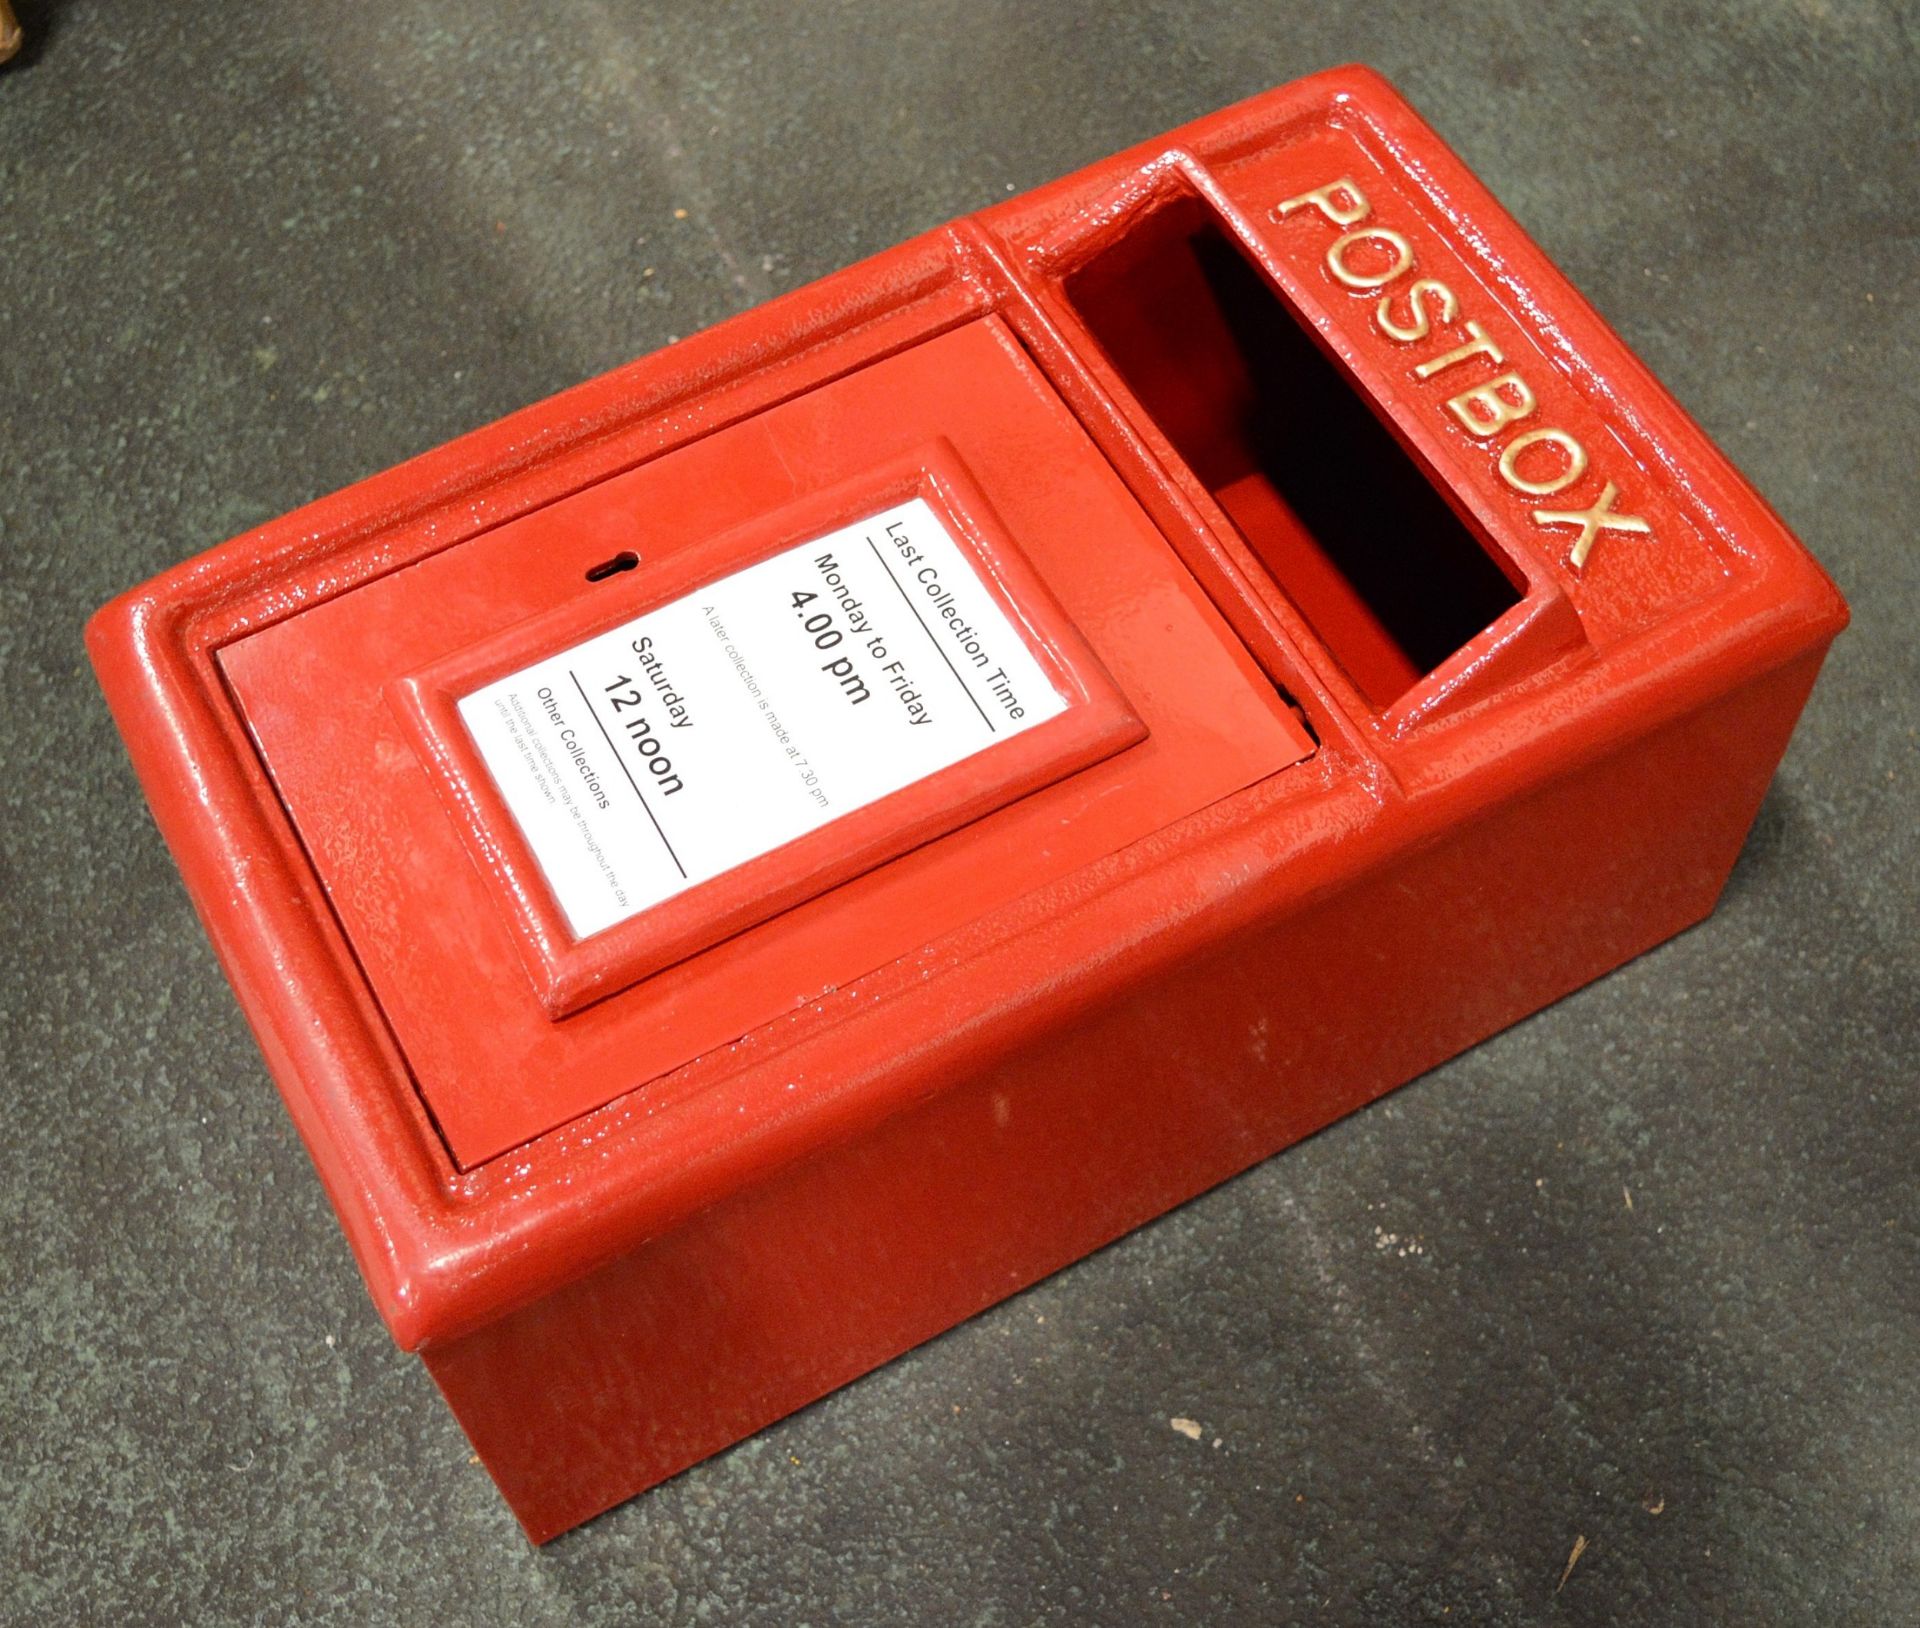 Replica postbox red - Image 2 of 2